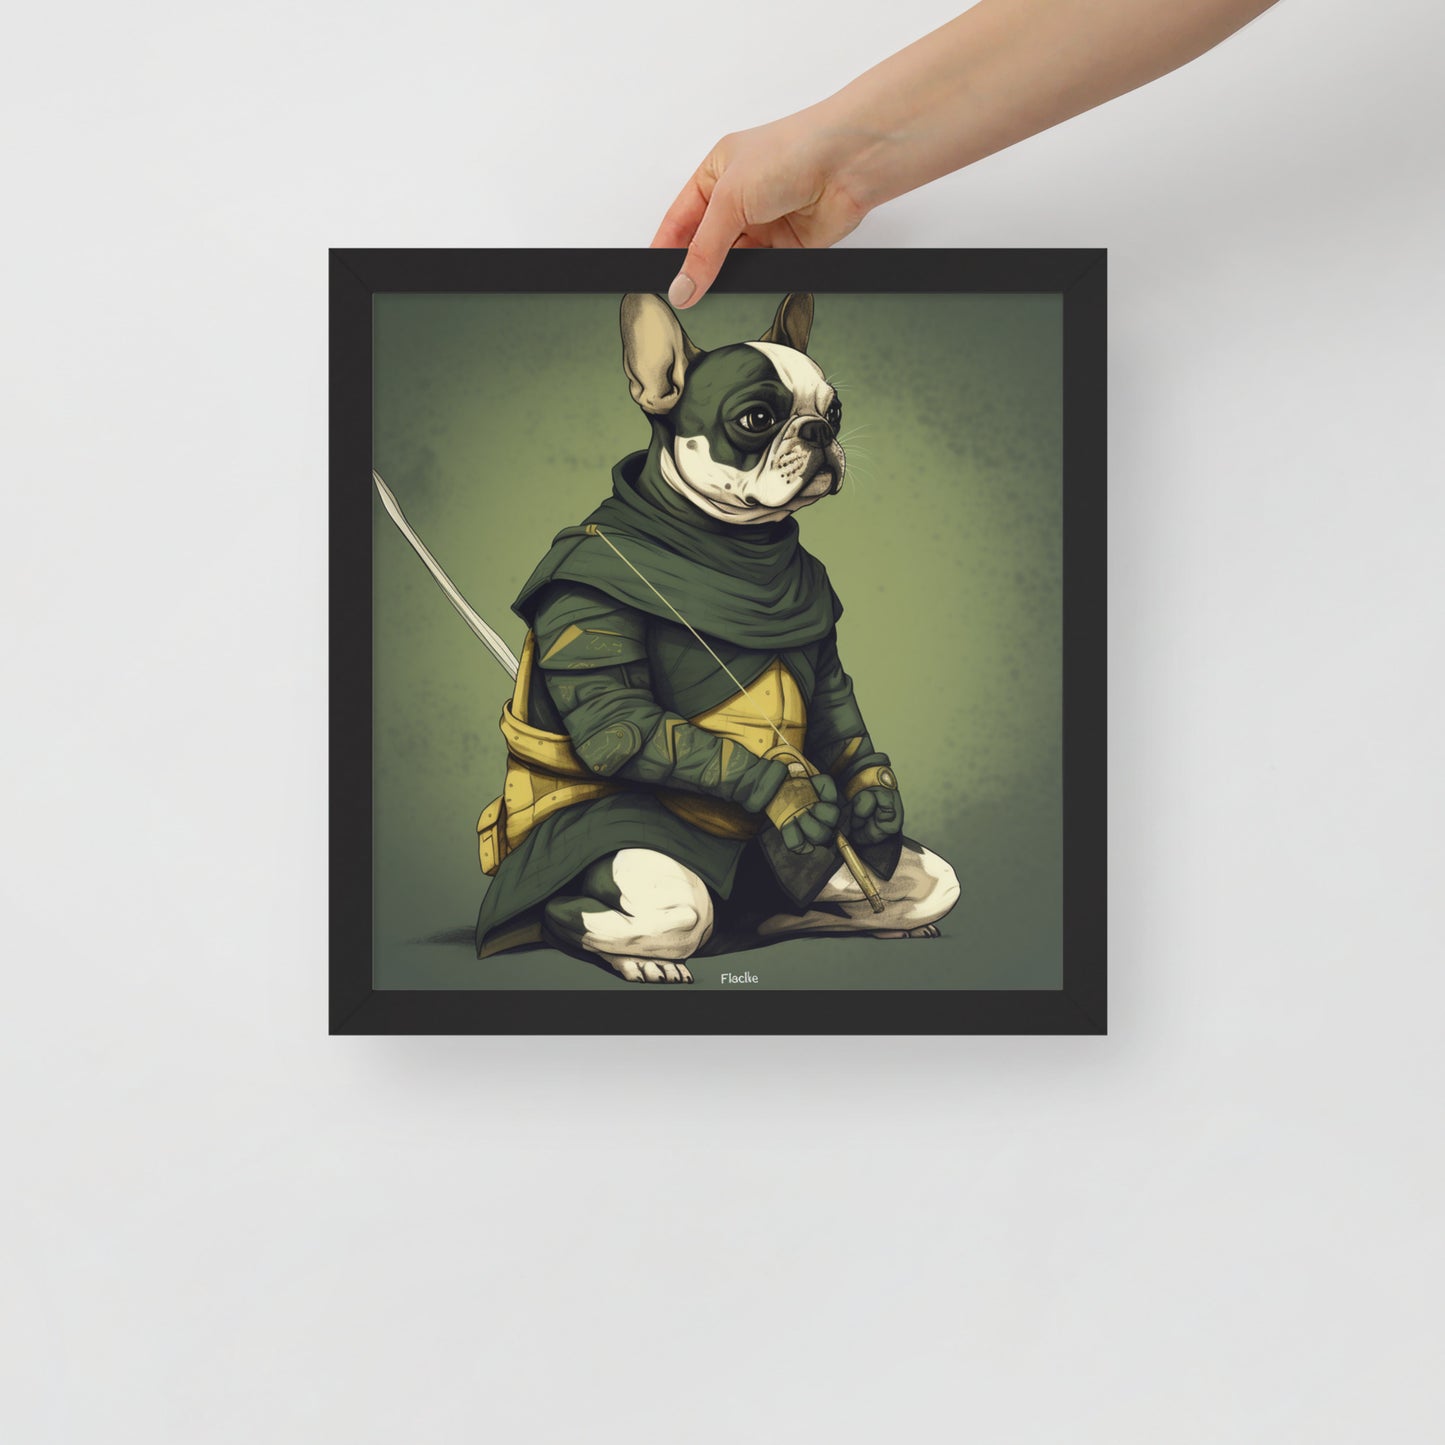 Masterful Frenchie Framed Poster - Exquisite Canine Wall Art